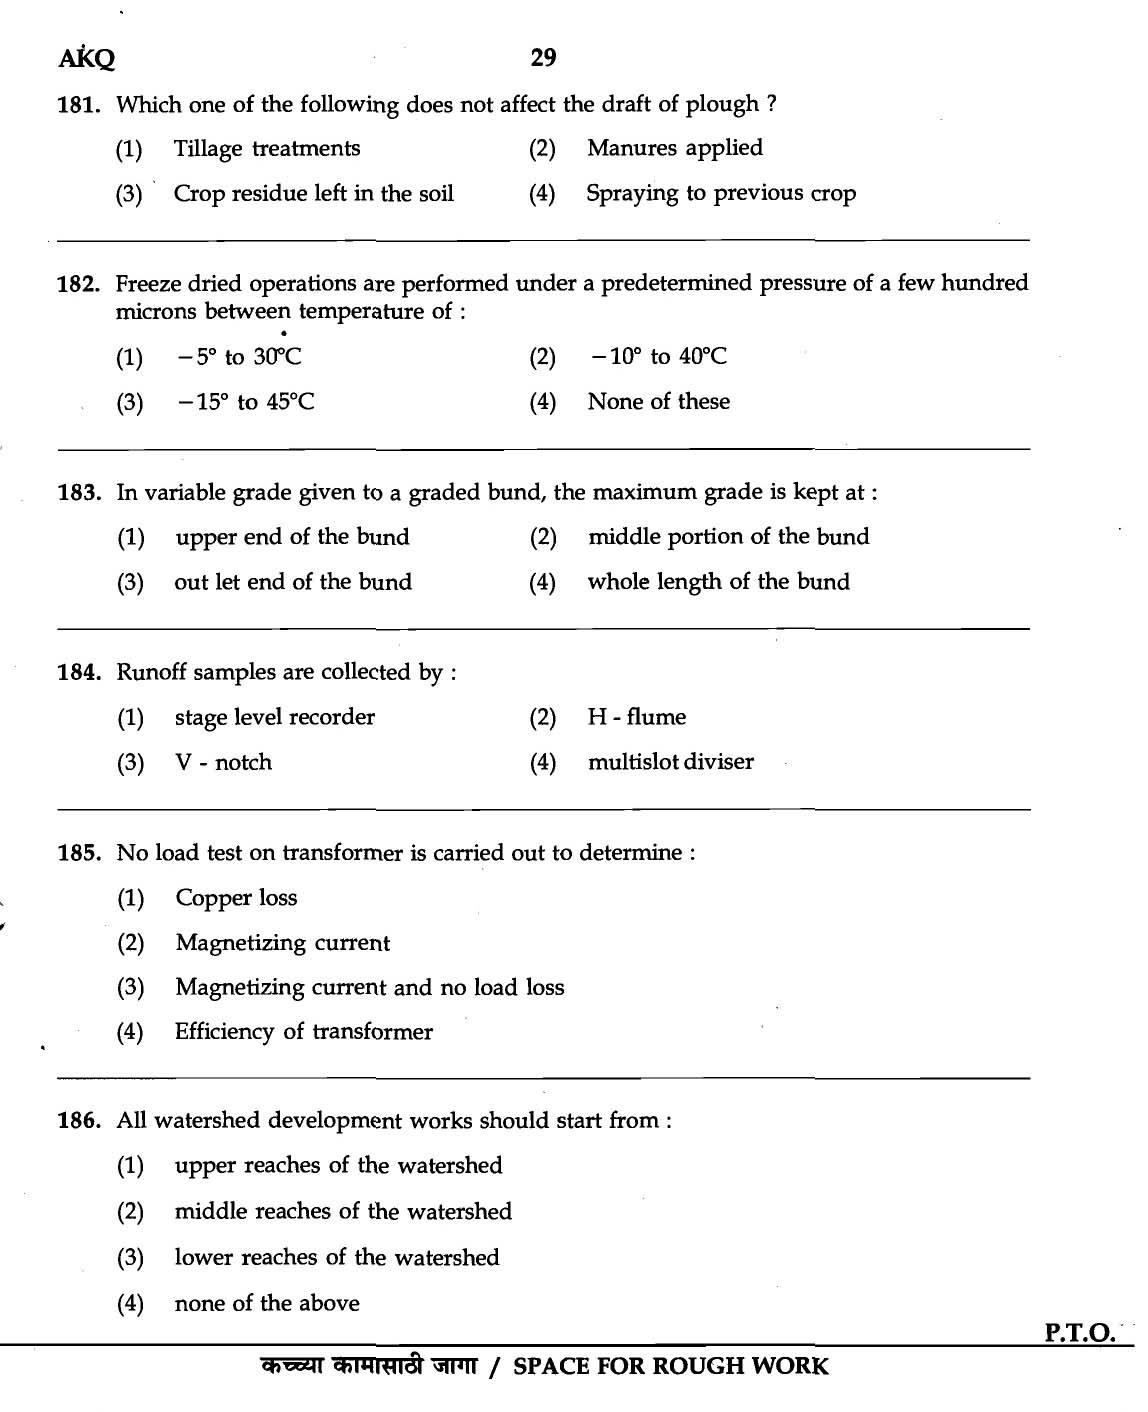 MPSC Agricultural Services Exam 2007 Question Paper Agricultural Engineering 27